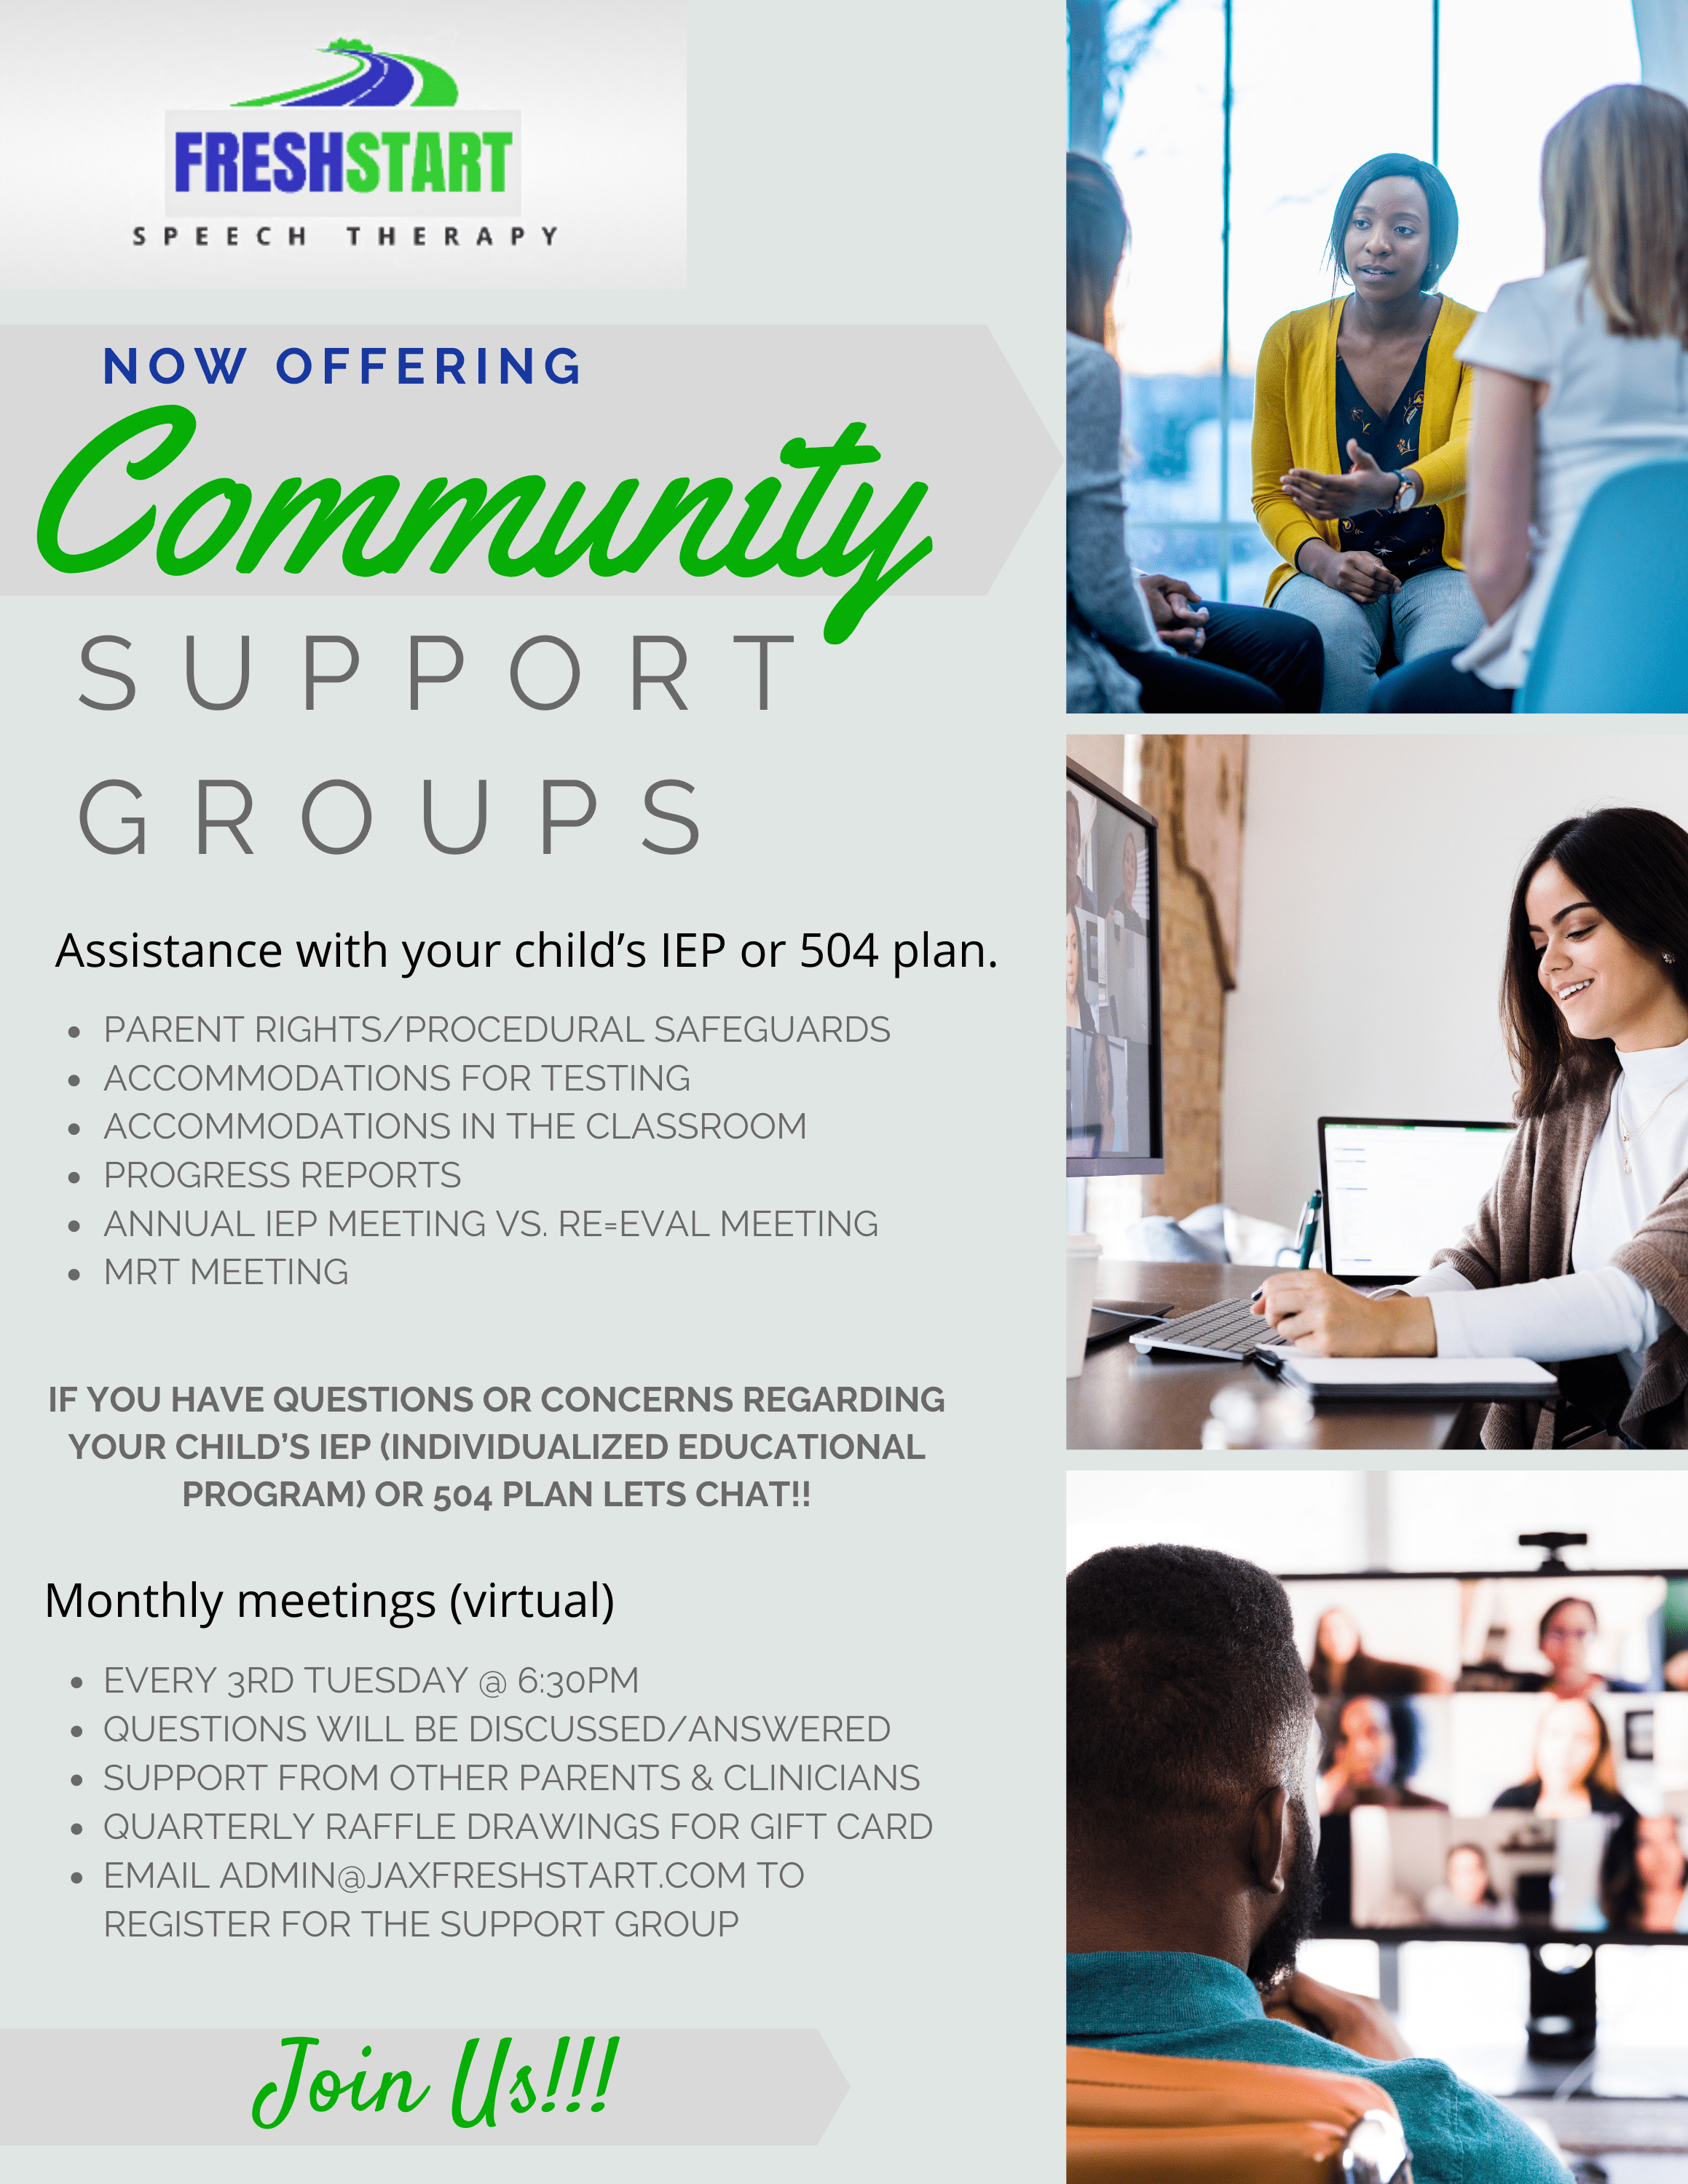 JAX Fresh Start Speech Therapy Jacksonville - Join our community support group